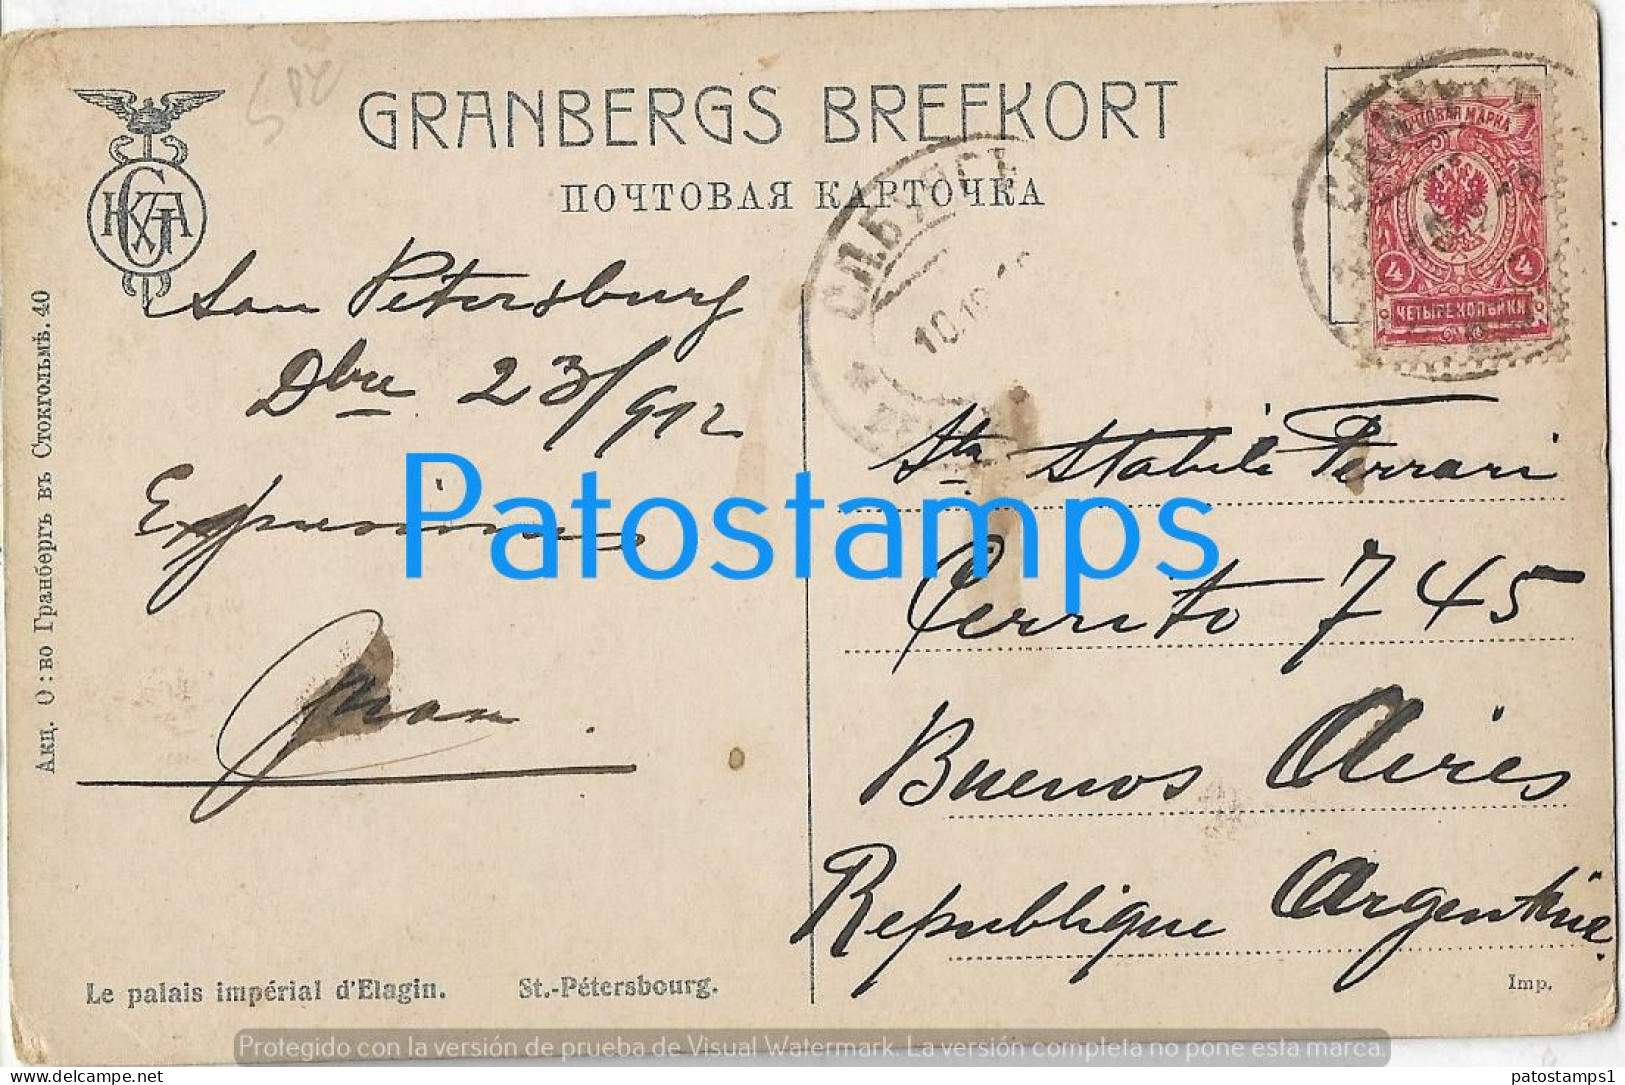 227637 RUSSIA ST PETERSBURG VIEW PARTIAL CIRCULATED TO ARGENTINA POSTAL POSTCARD - Russie